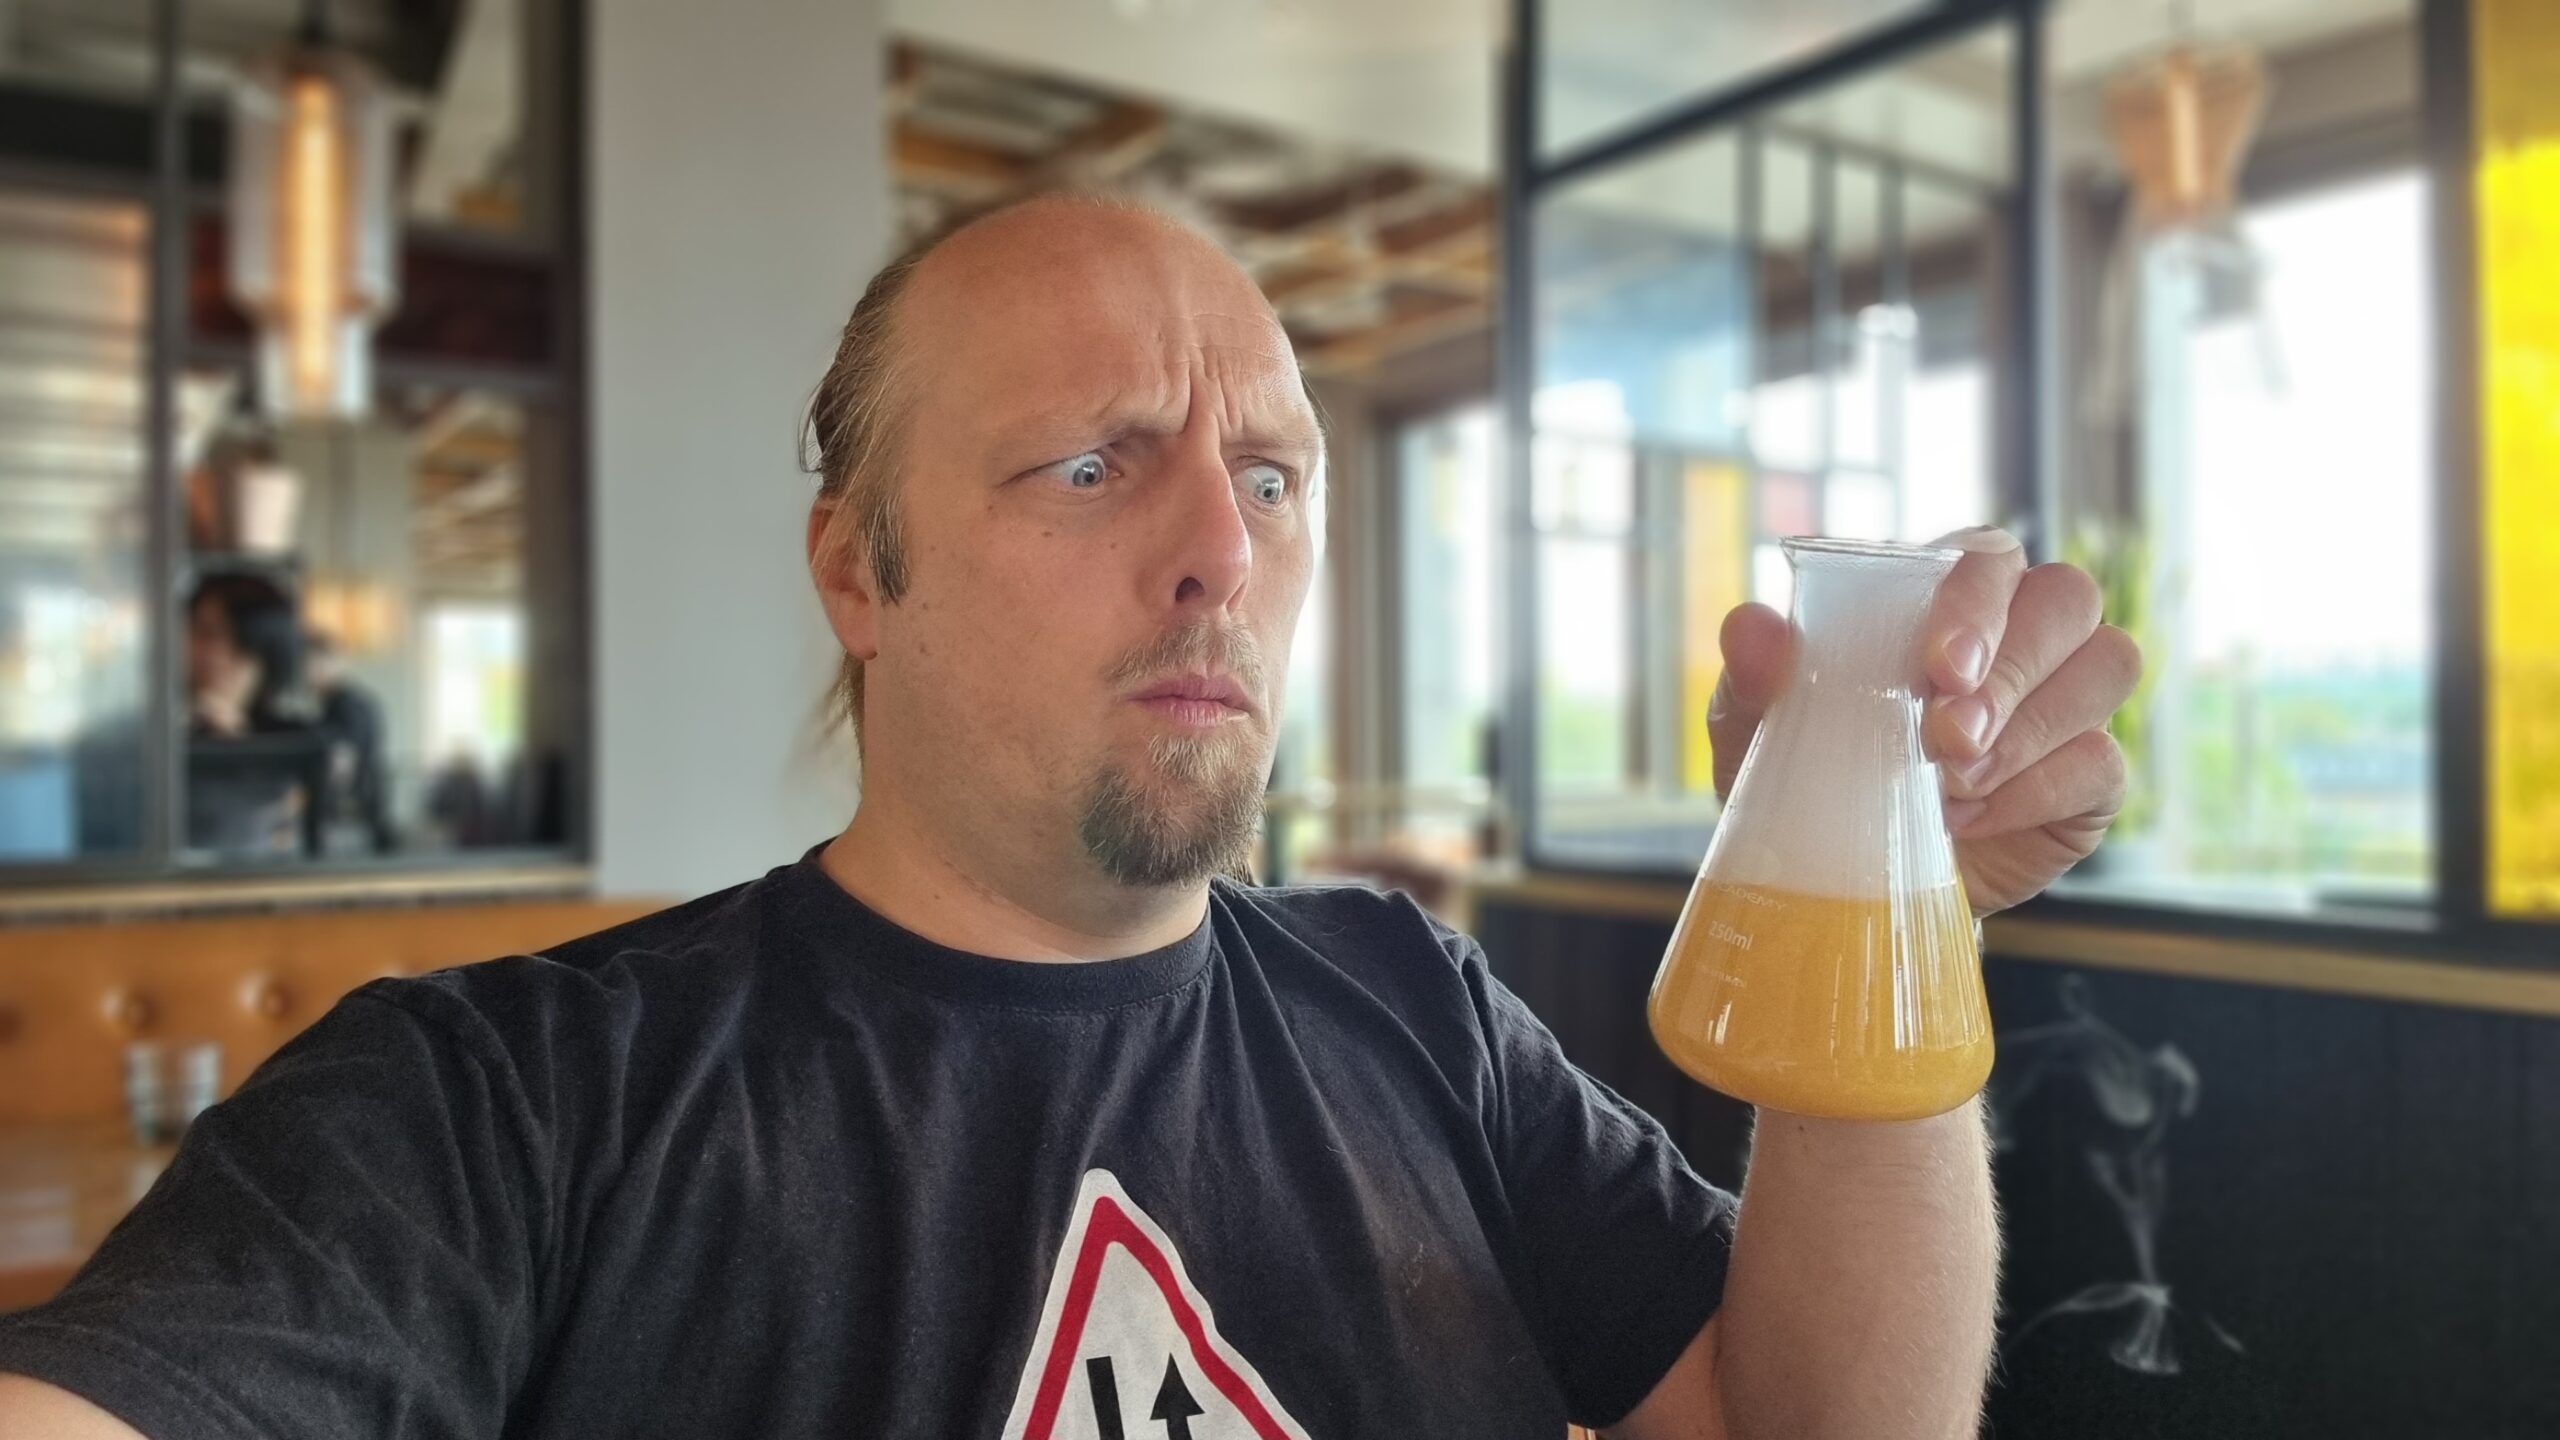 Selfie photograph of Dan, in a bar with a rooftop view of daylight out the windows in the background, looks concerned as he stares at the a frothy, bubbling flask of yellow liquid he's holding.